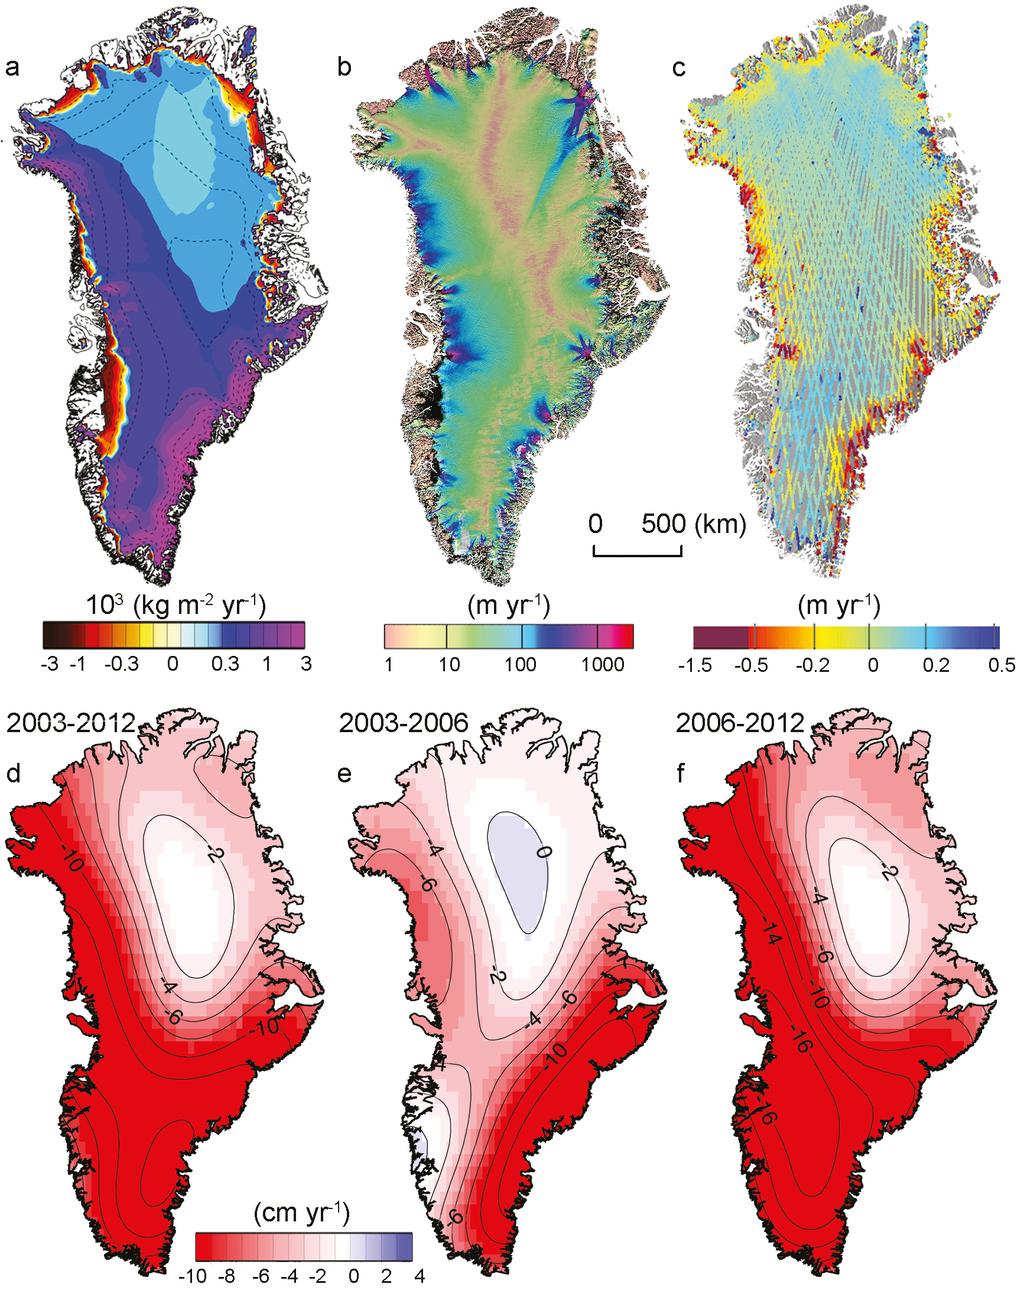 Observed mass balance of Greenland a Model-derived accumulation b Flow speed (satellite) c Elevation change (satellite) d Ice loss (cm